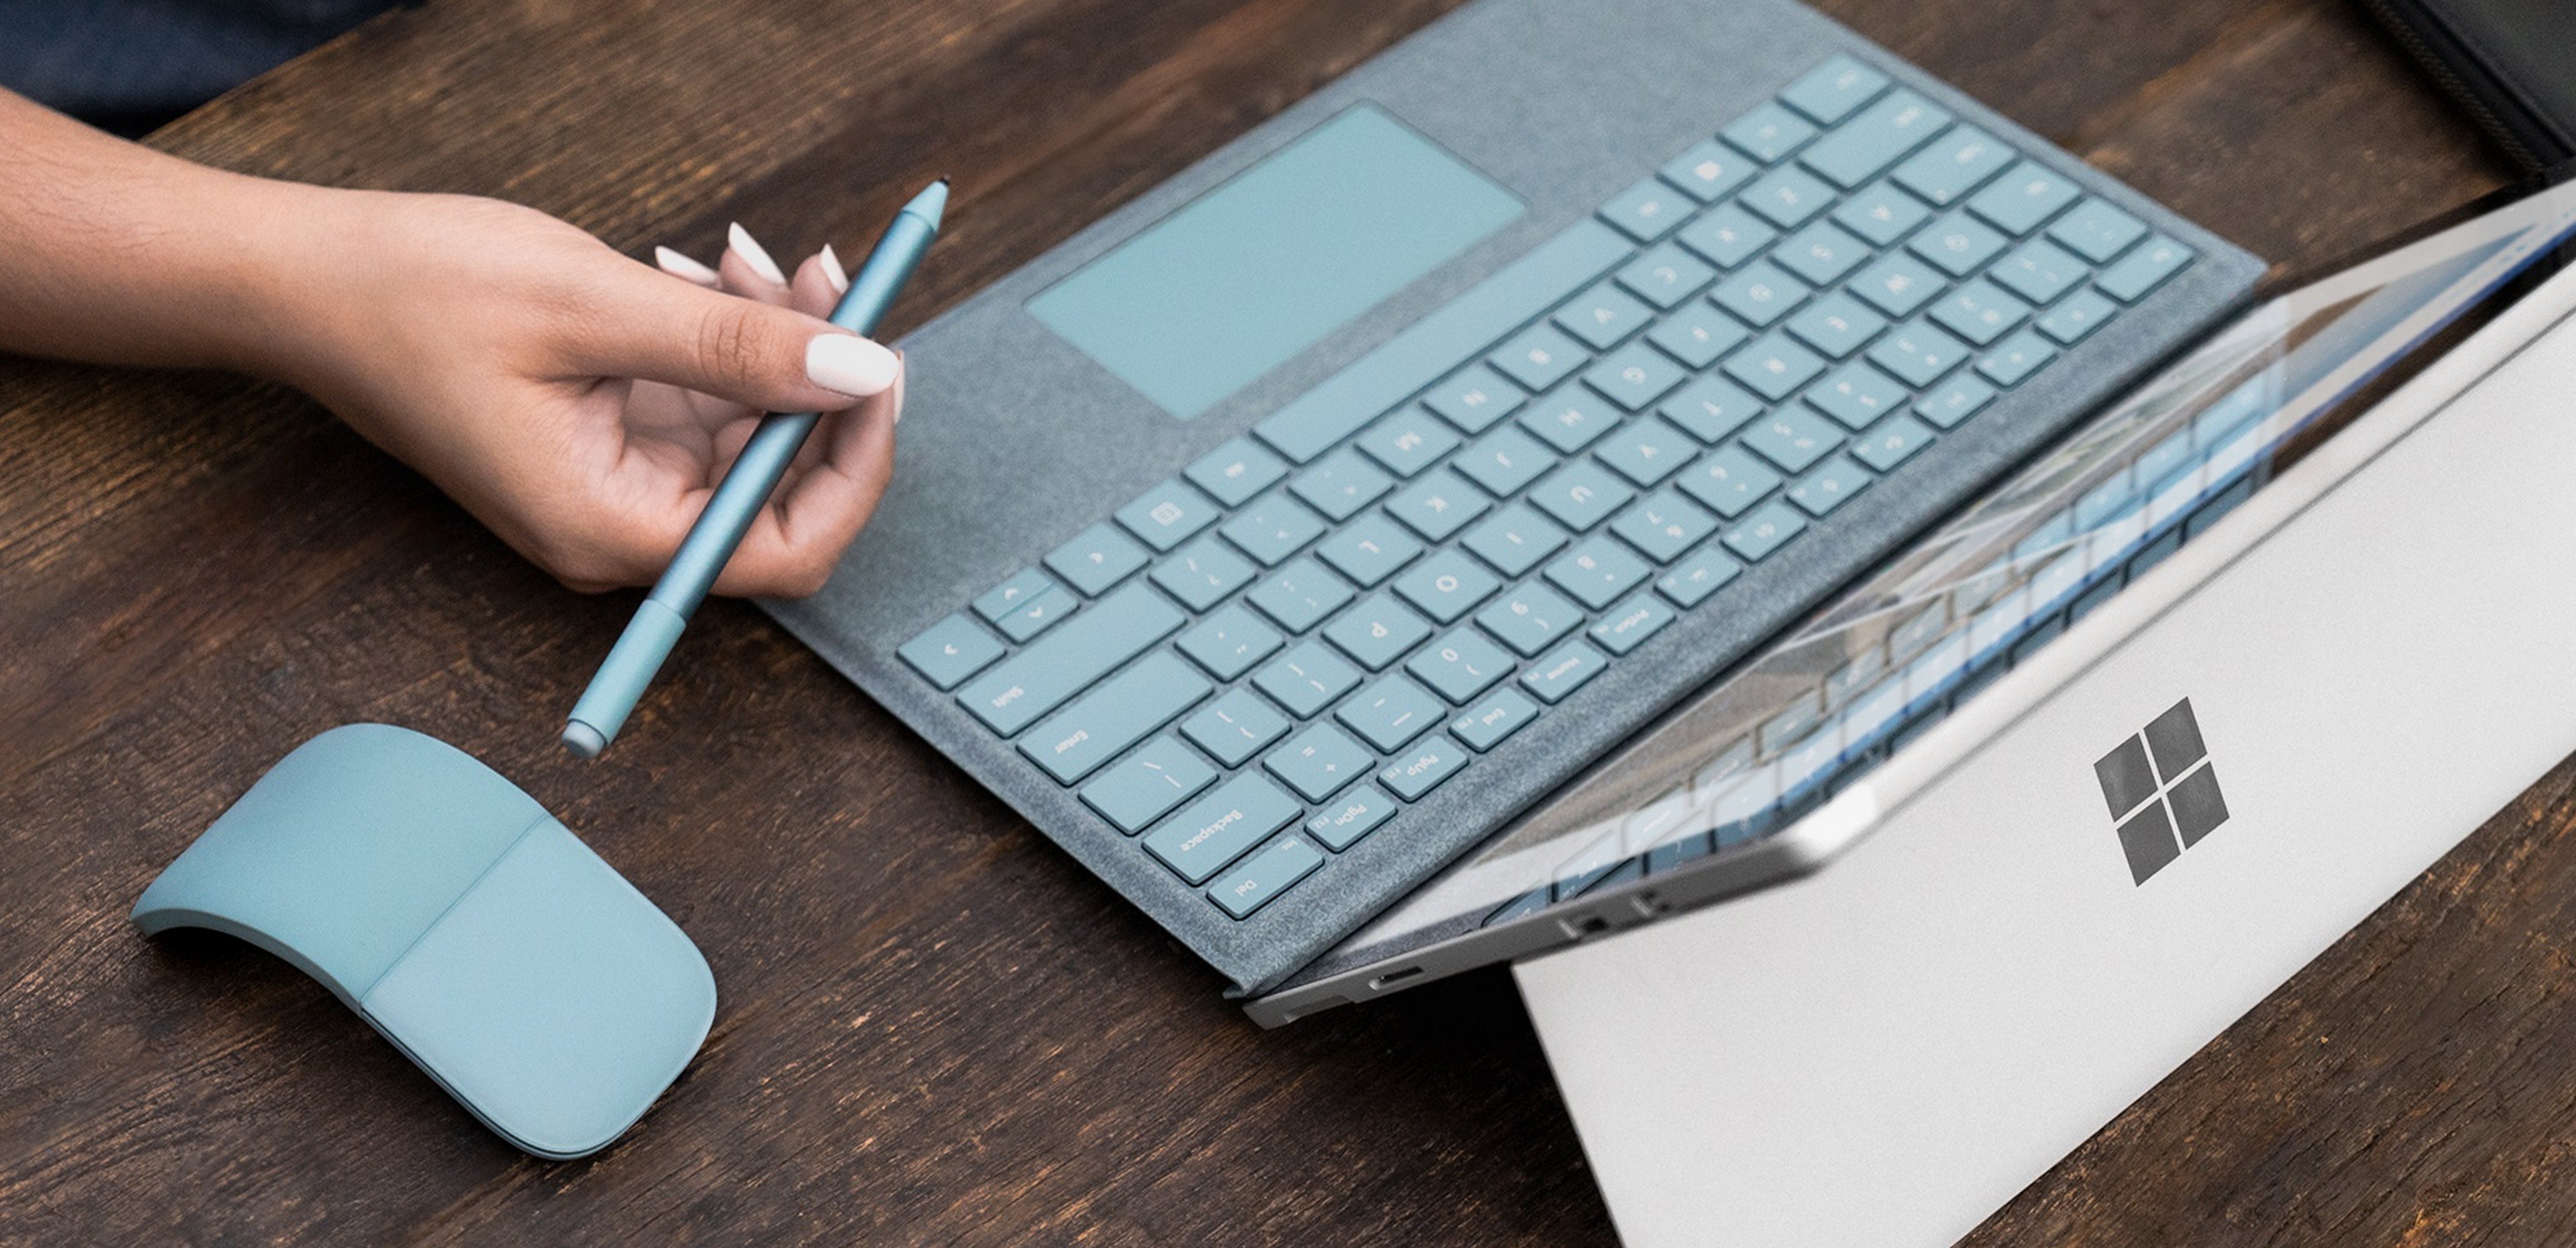 Person sitting at a table holding the new aqua Type Cover, Surface Arc Mouse, and Surface Pen.